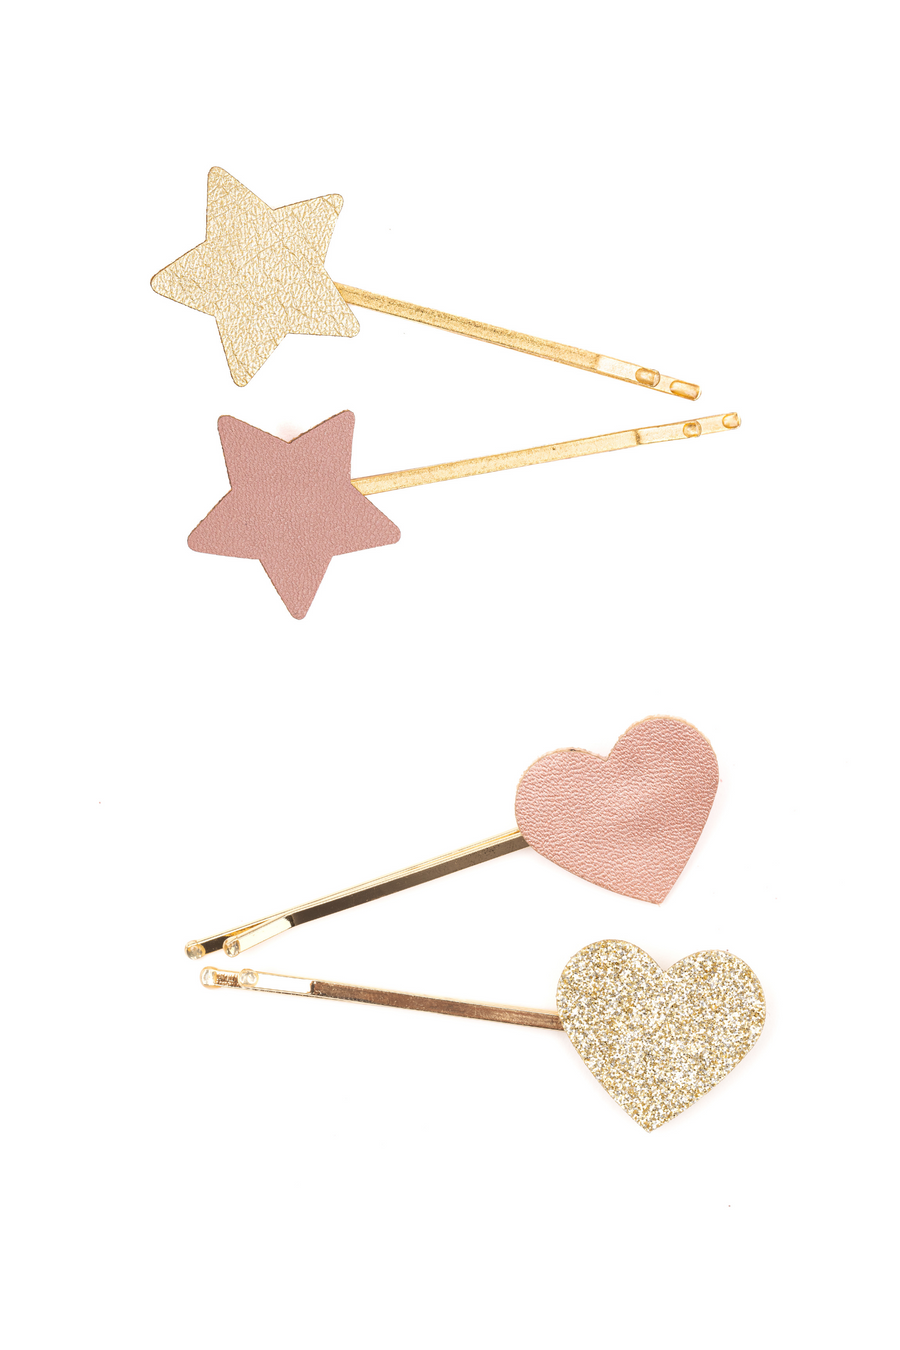 Boutique Matte Star Bobby Hairclips: Hearts or Stars